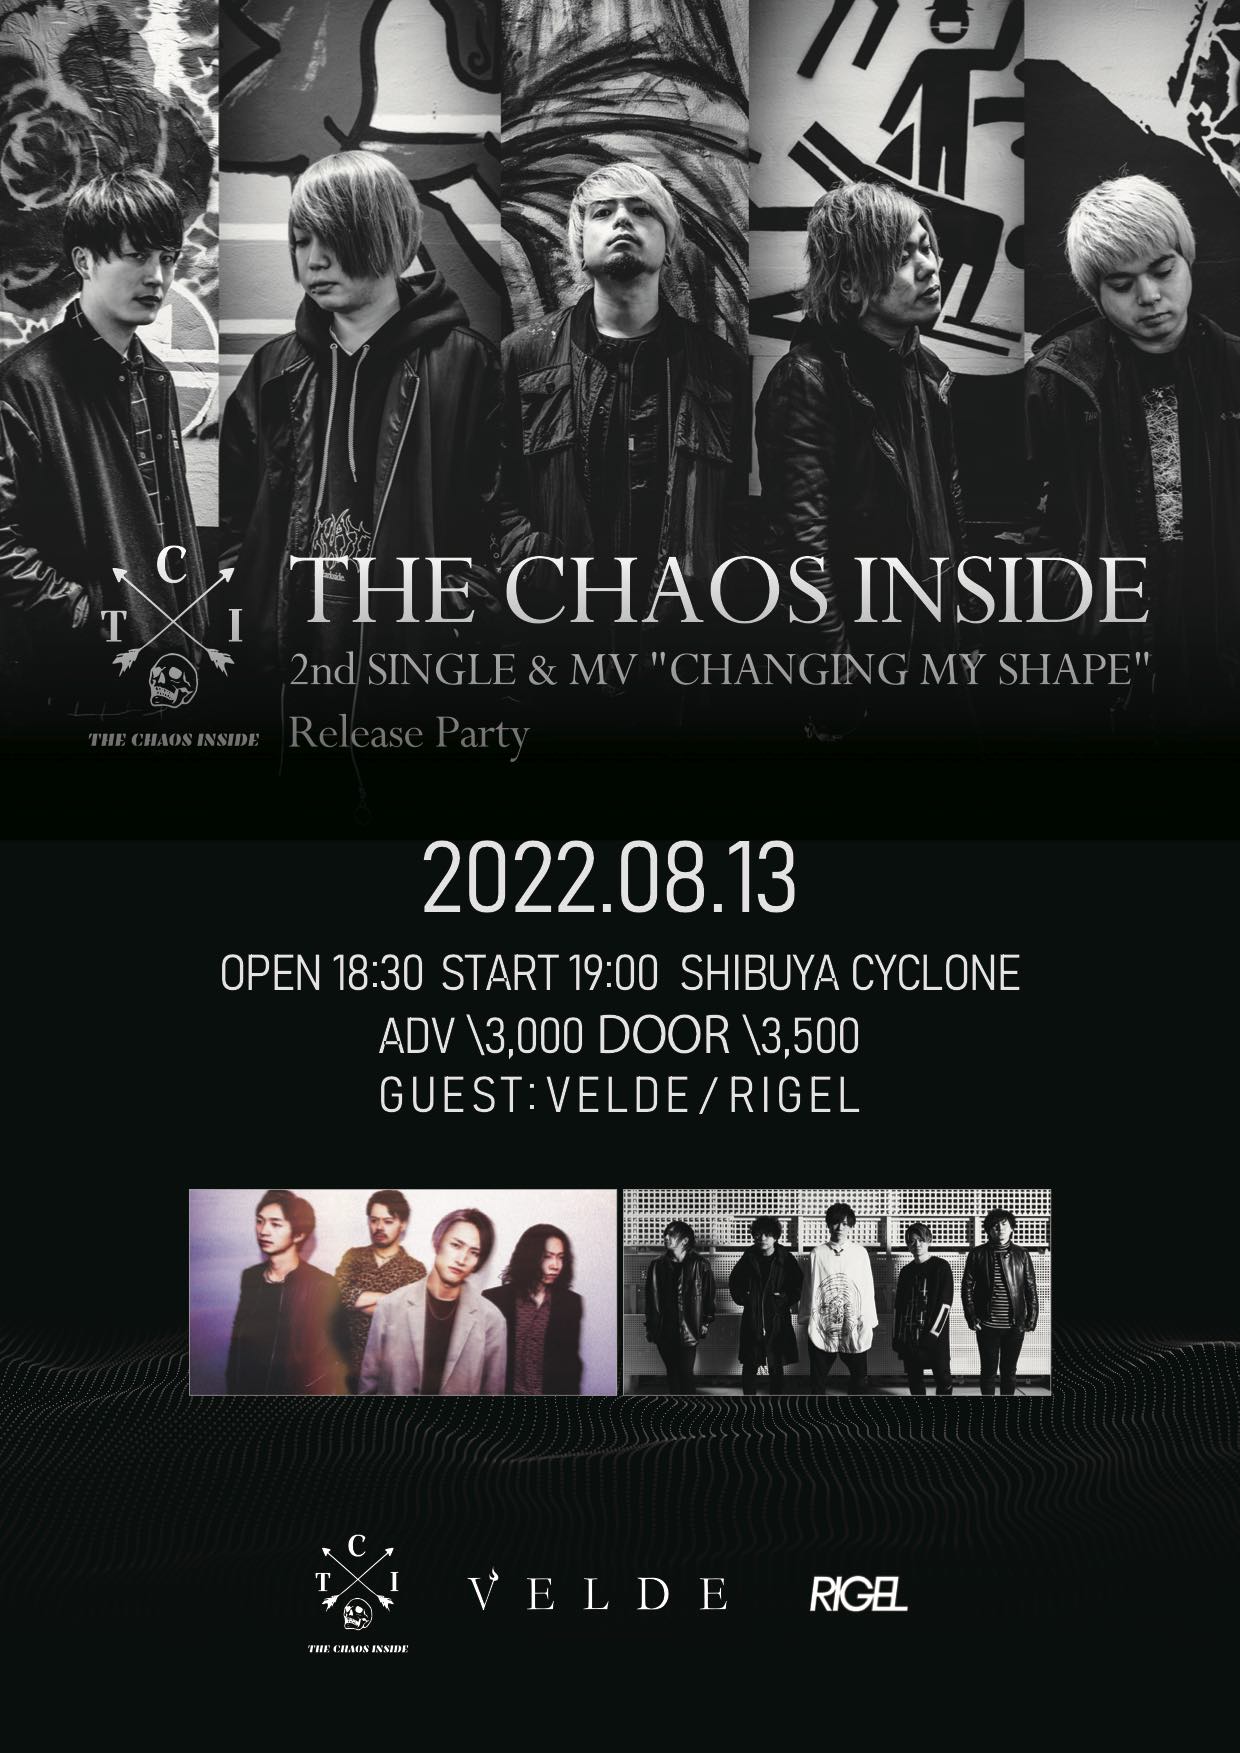 THE CHAOS INSIDE 2nd SINGLE & MV "CHANGING MY SHAPE" Release Party